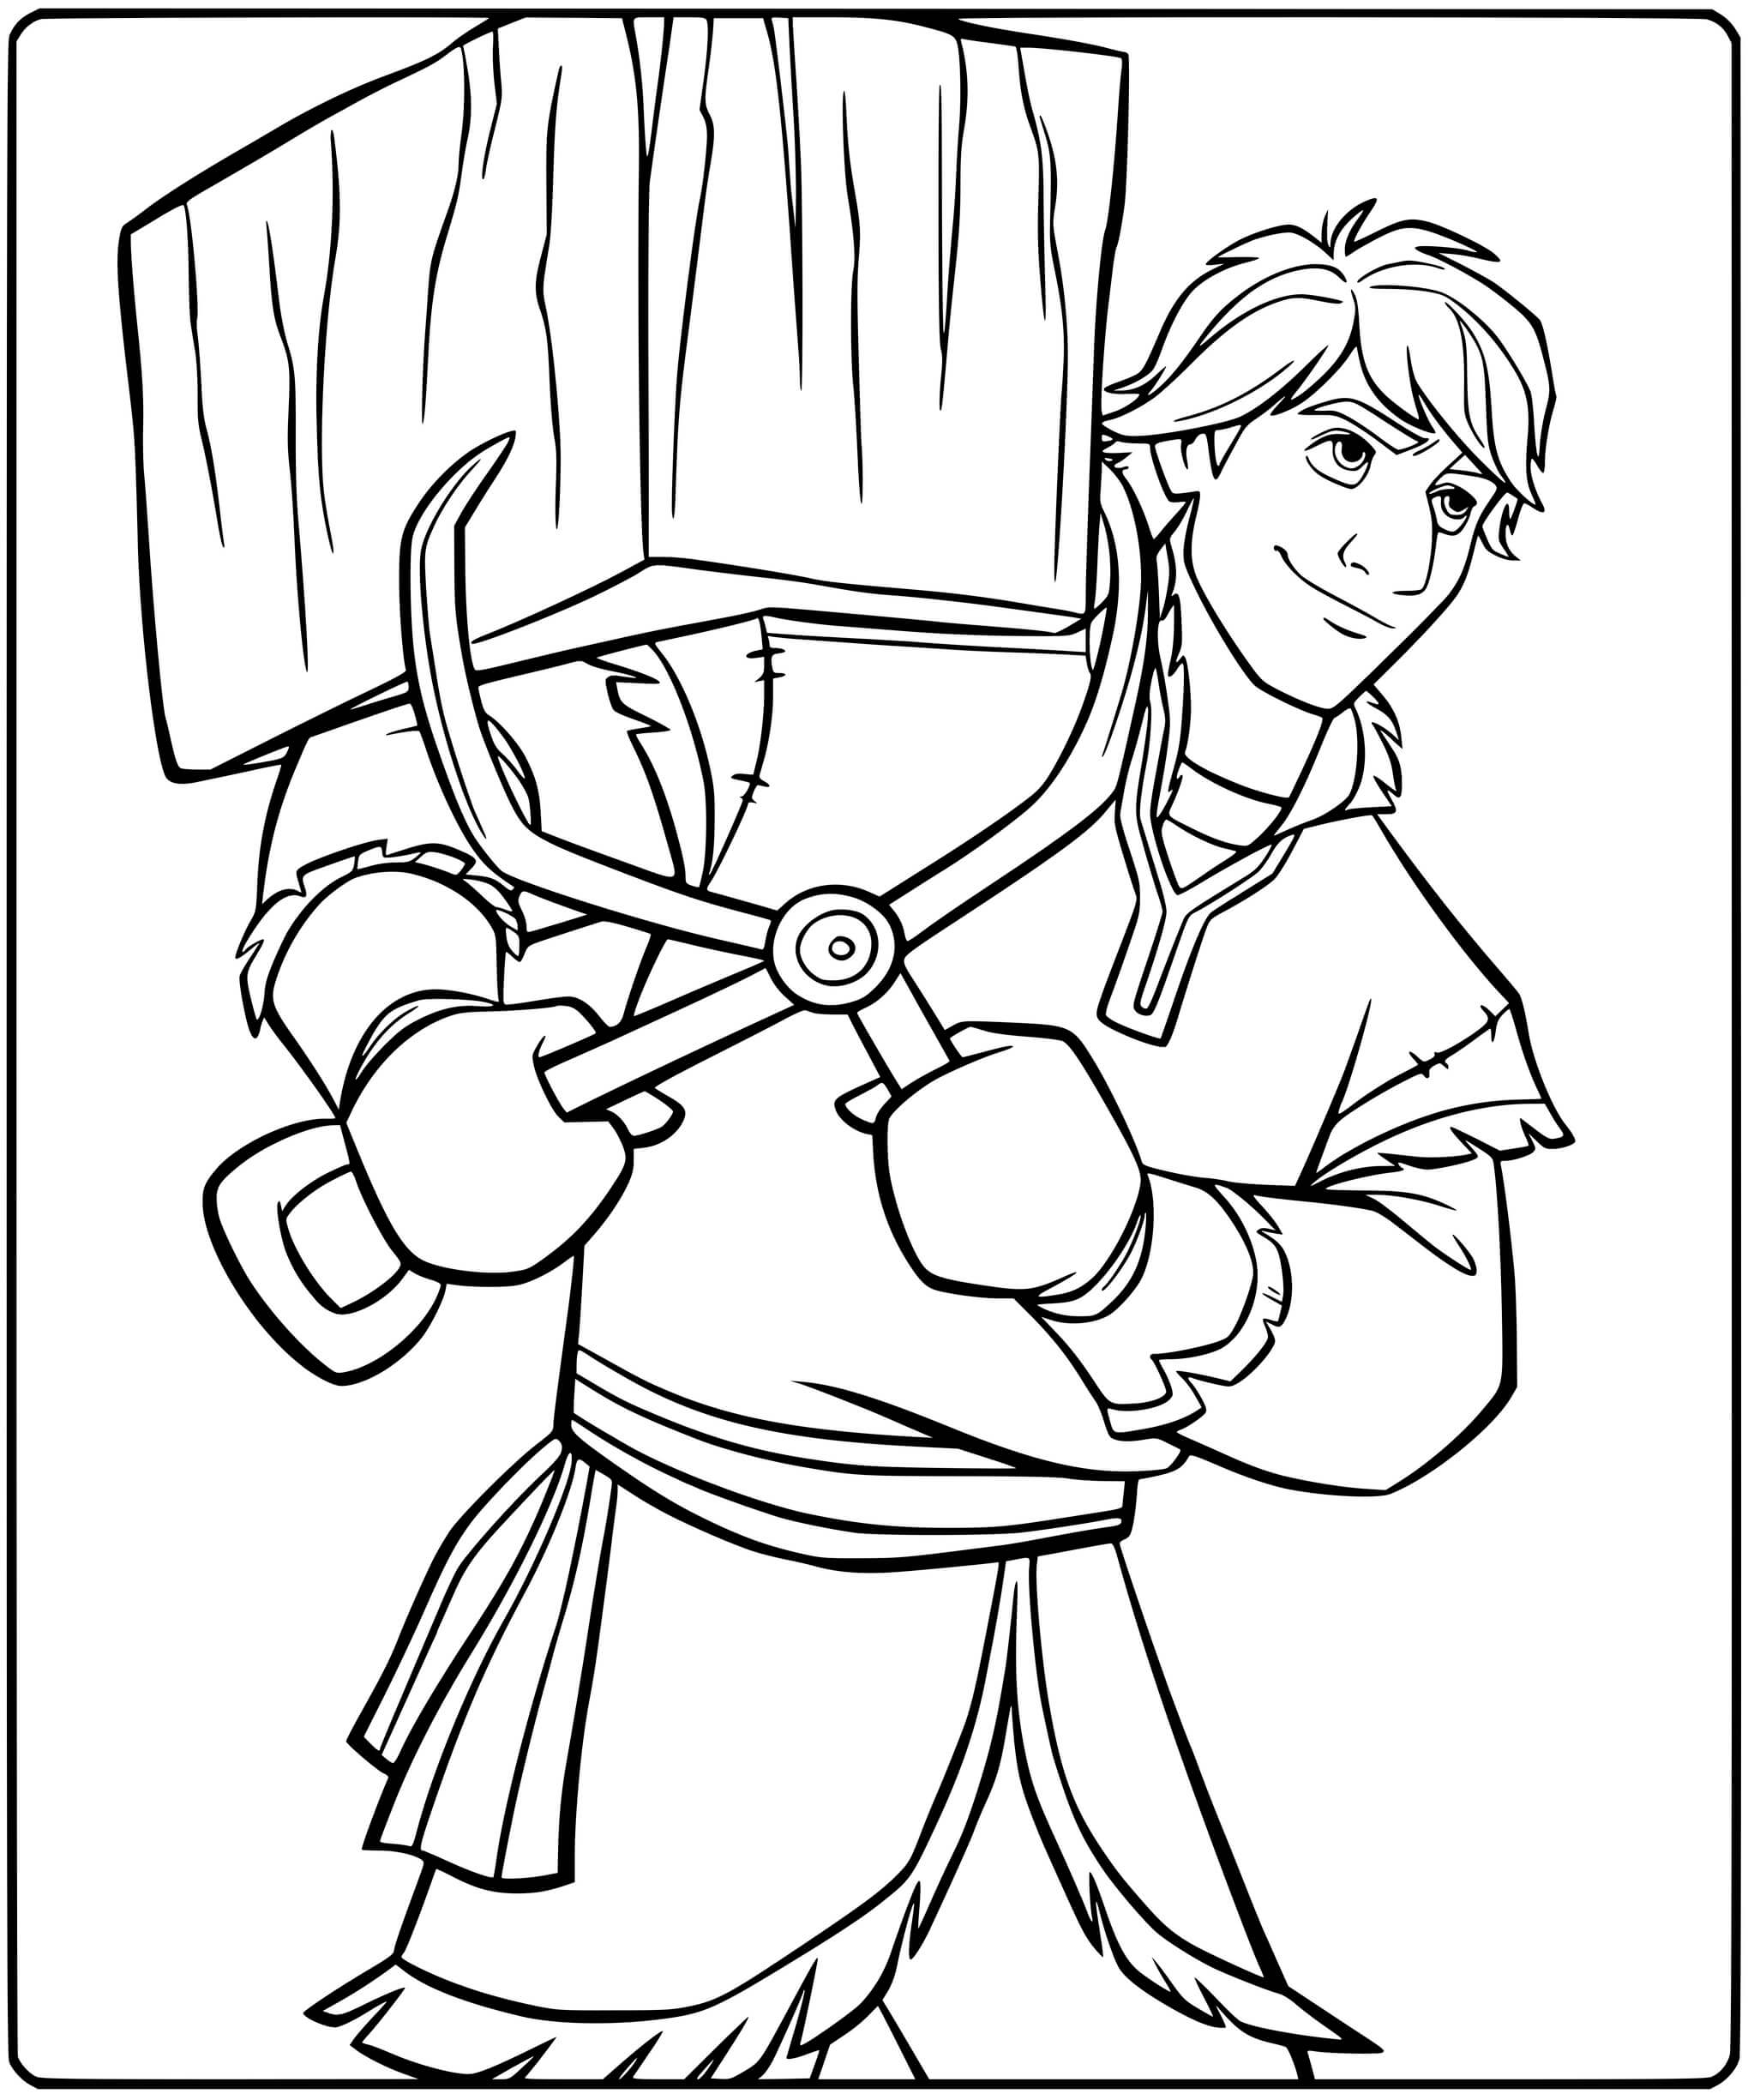 Kristoff From Disney Frozen 2 To Color